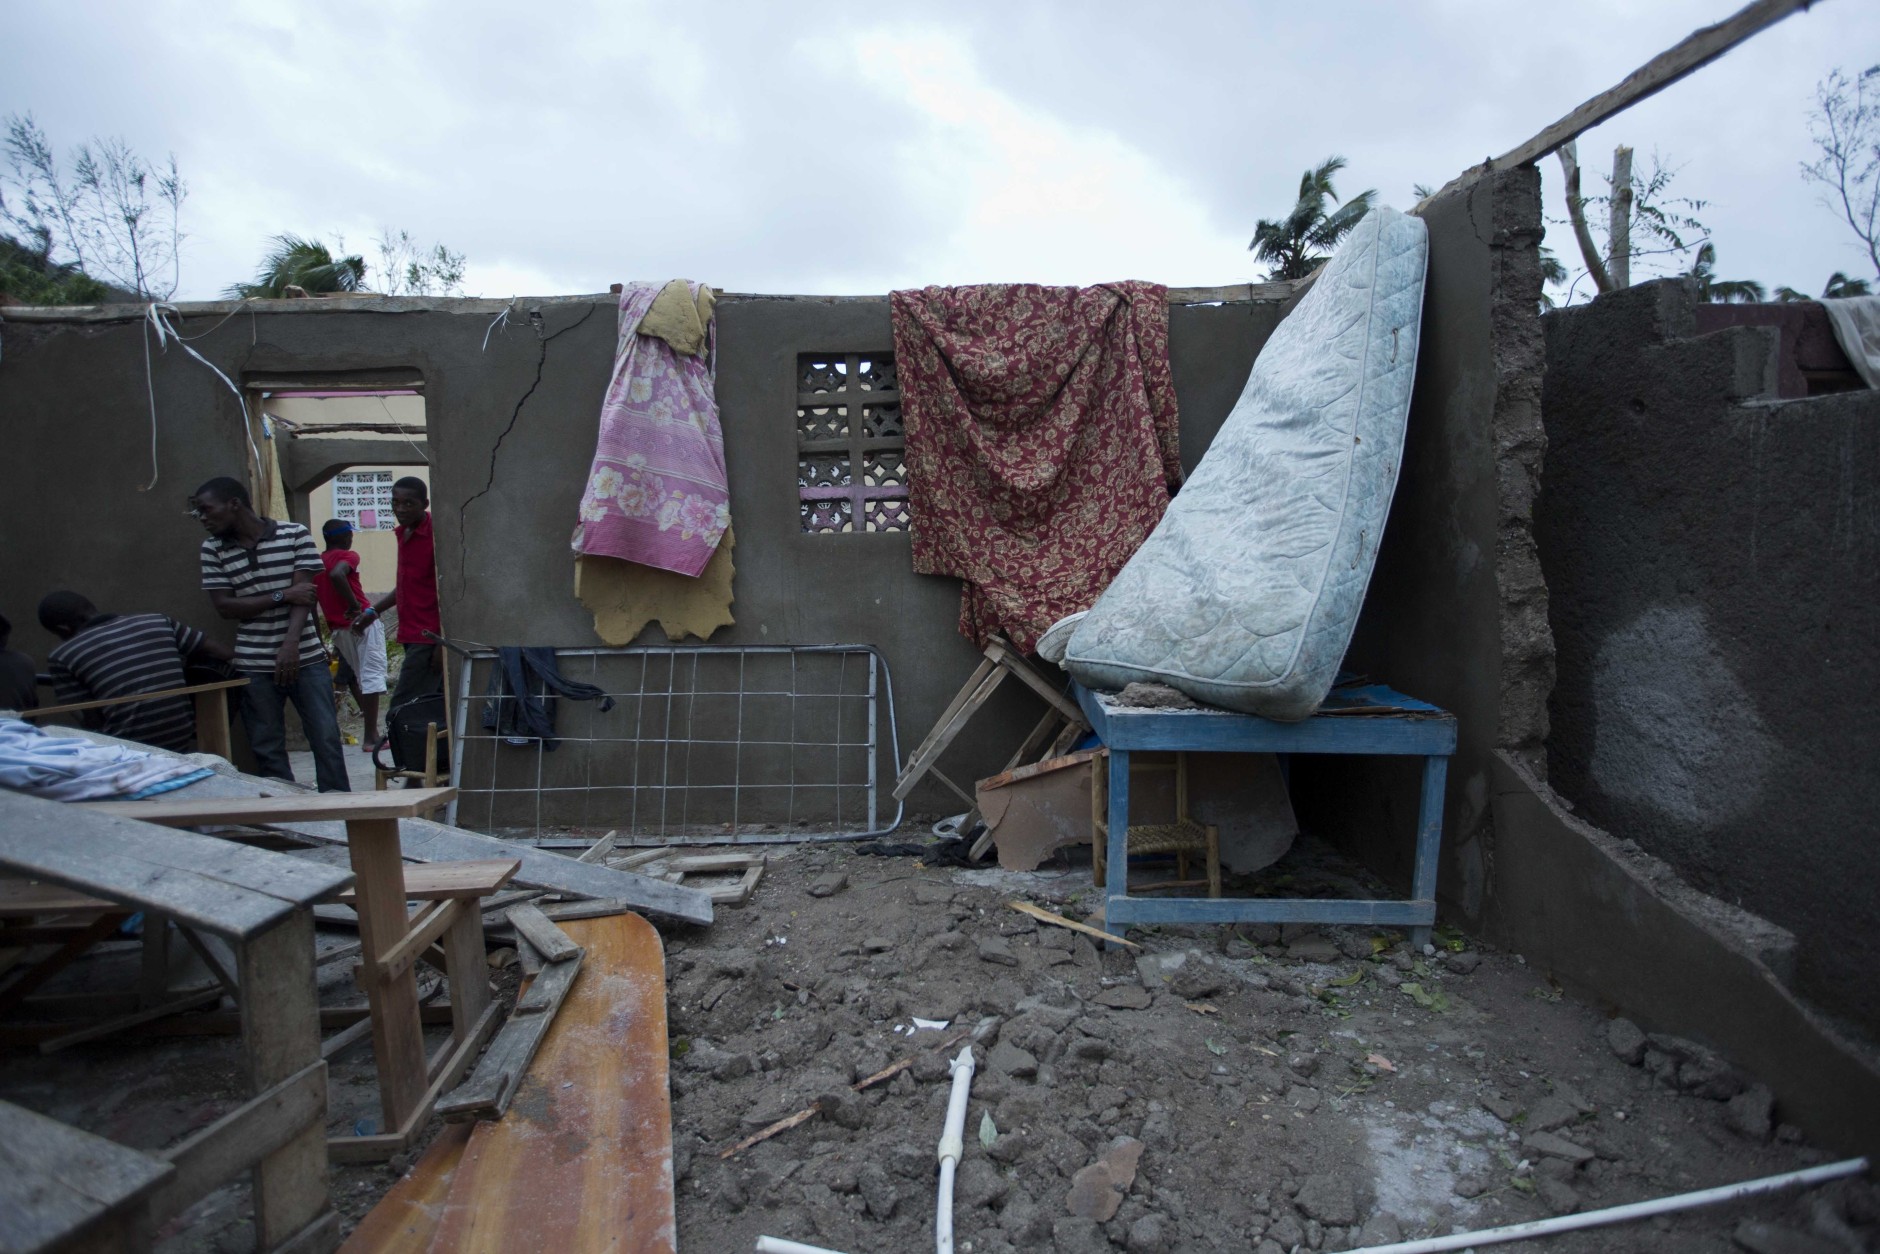 Residents walk into a destroyed home after it was damaged by Hurricane Matthew in Saint-Louis, Haiti, Wednesday, Oct. 5, 2016. Rescue workers in Haiti struggled to reach cutoff towns and learn the full extent of the death and destruction caused by Hurricane Matthew as the storm began battering the Bahamas on Wednesday and triggered large-scale evacuations along the U.S. East Coast. ( AP Photo/Dieu Nalio Chery)